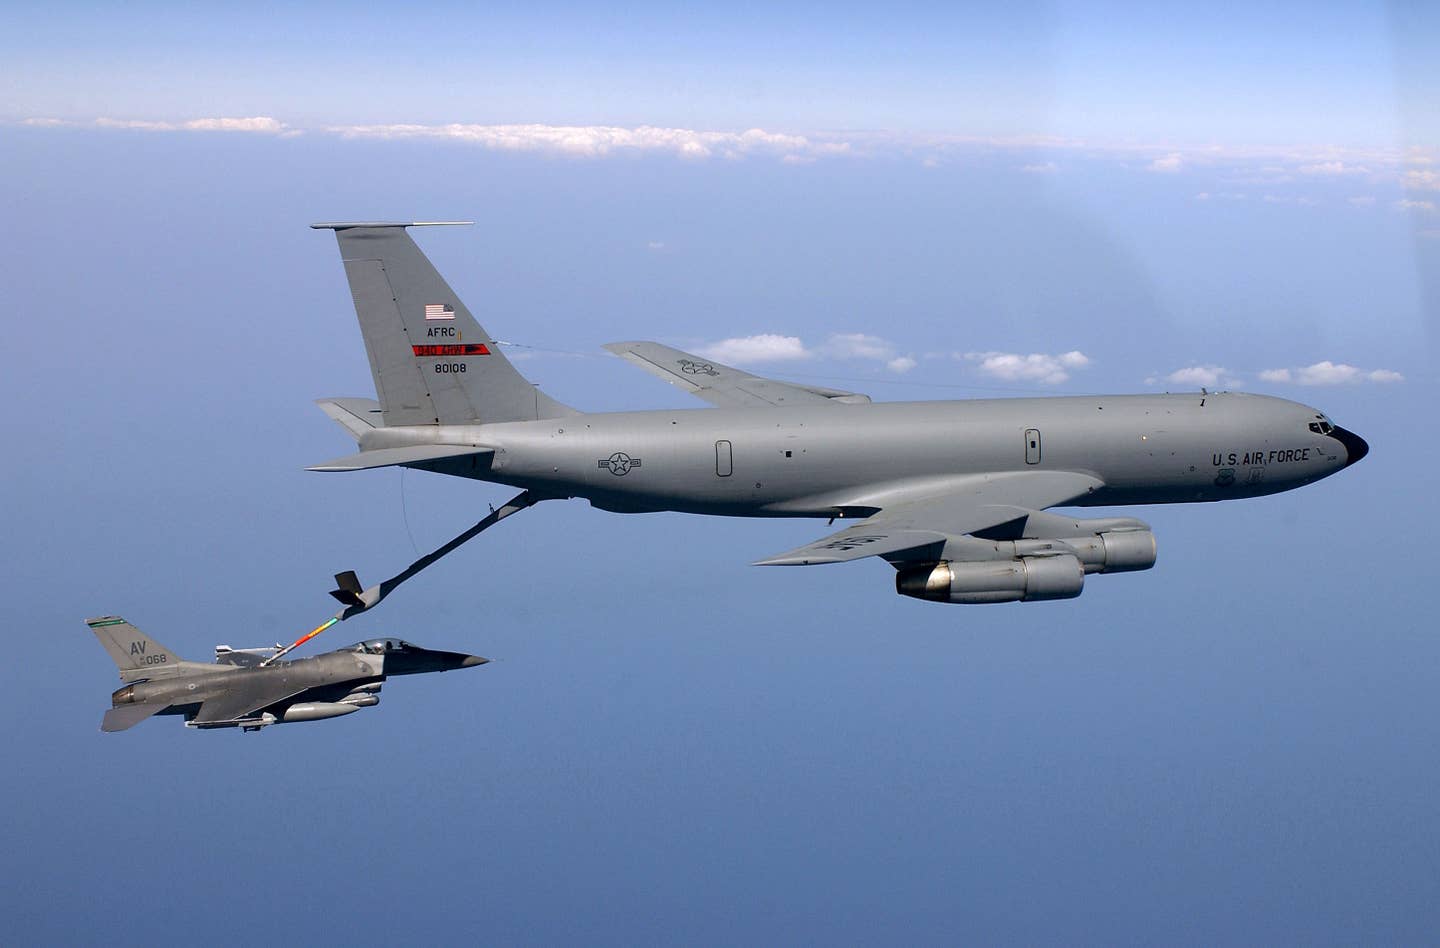 A USAF KC-135 refueling an F-16 Fighting Falcon. Old warhorses still have their uses. (Photo US Air Force)